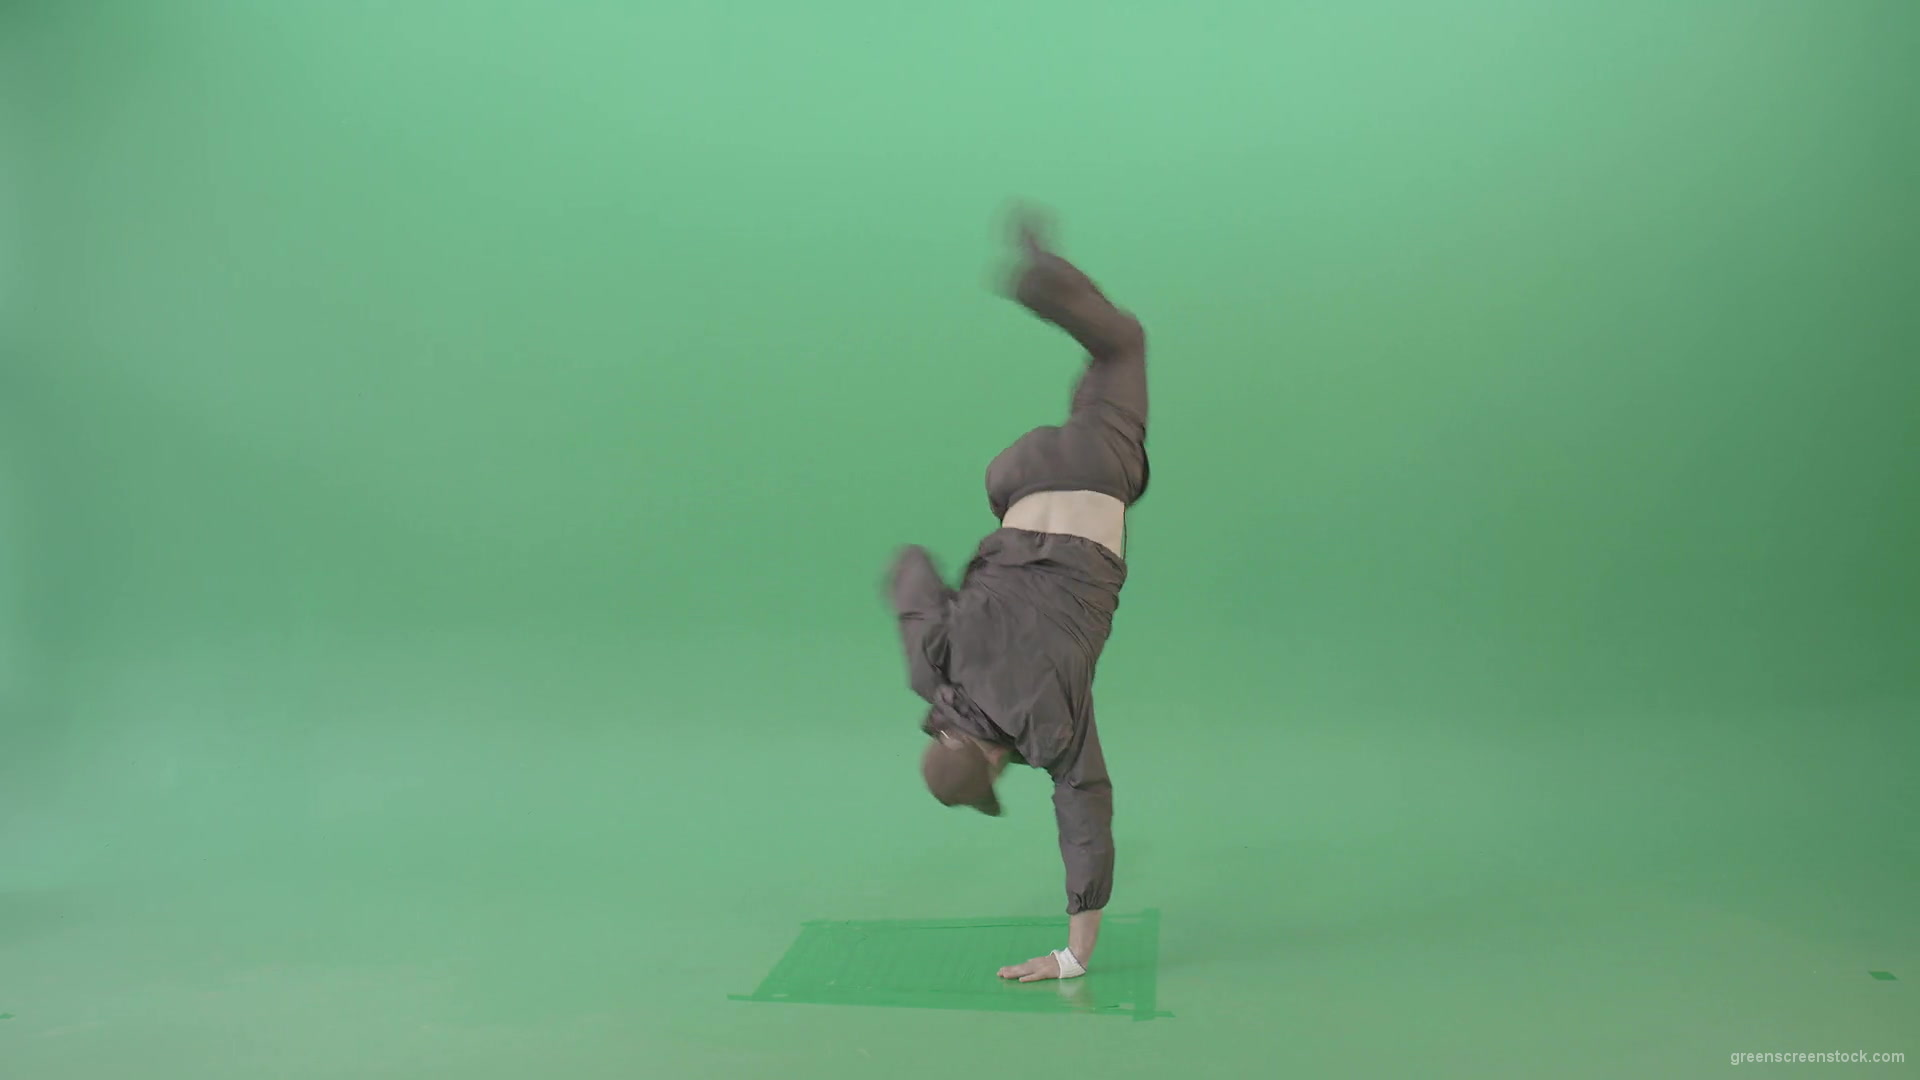 Breakadance-Man-making-dynamic-power-move-element-spinning-on-hand-over-green-screen-4K-Video-Footage-1920_006 Green Screen Stock